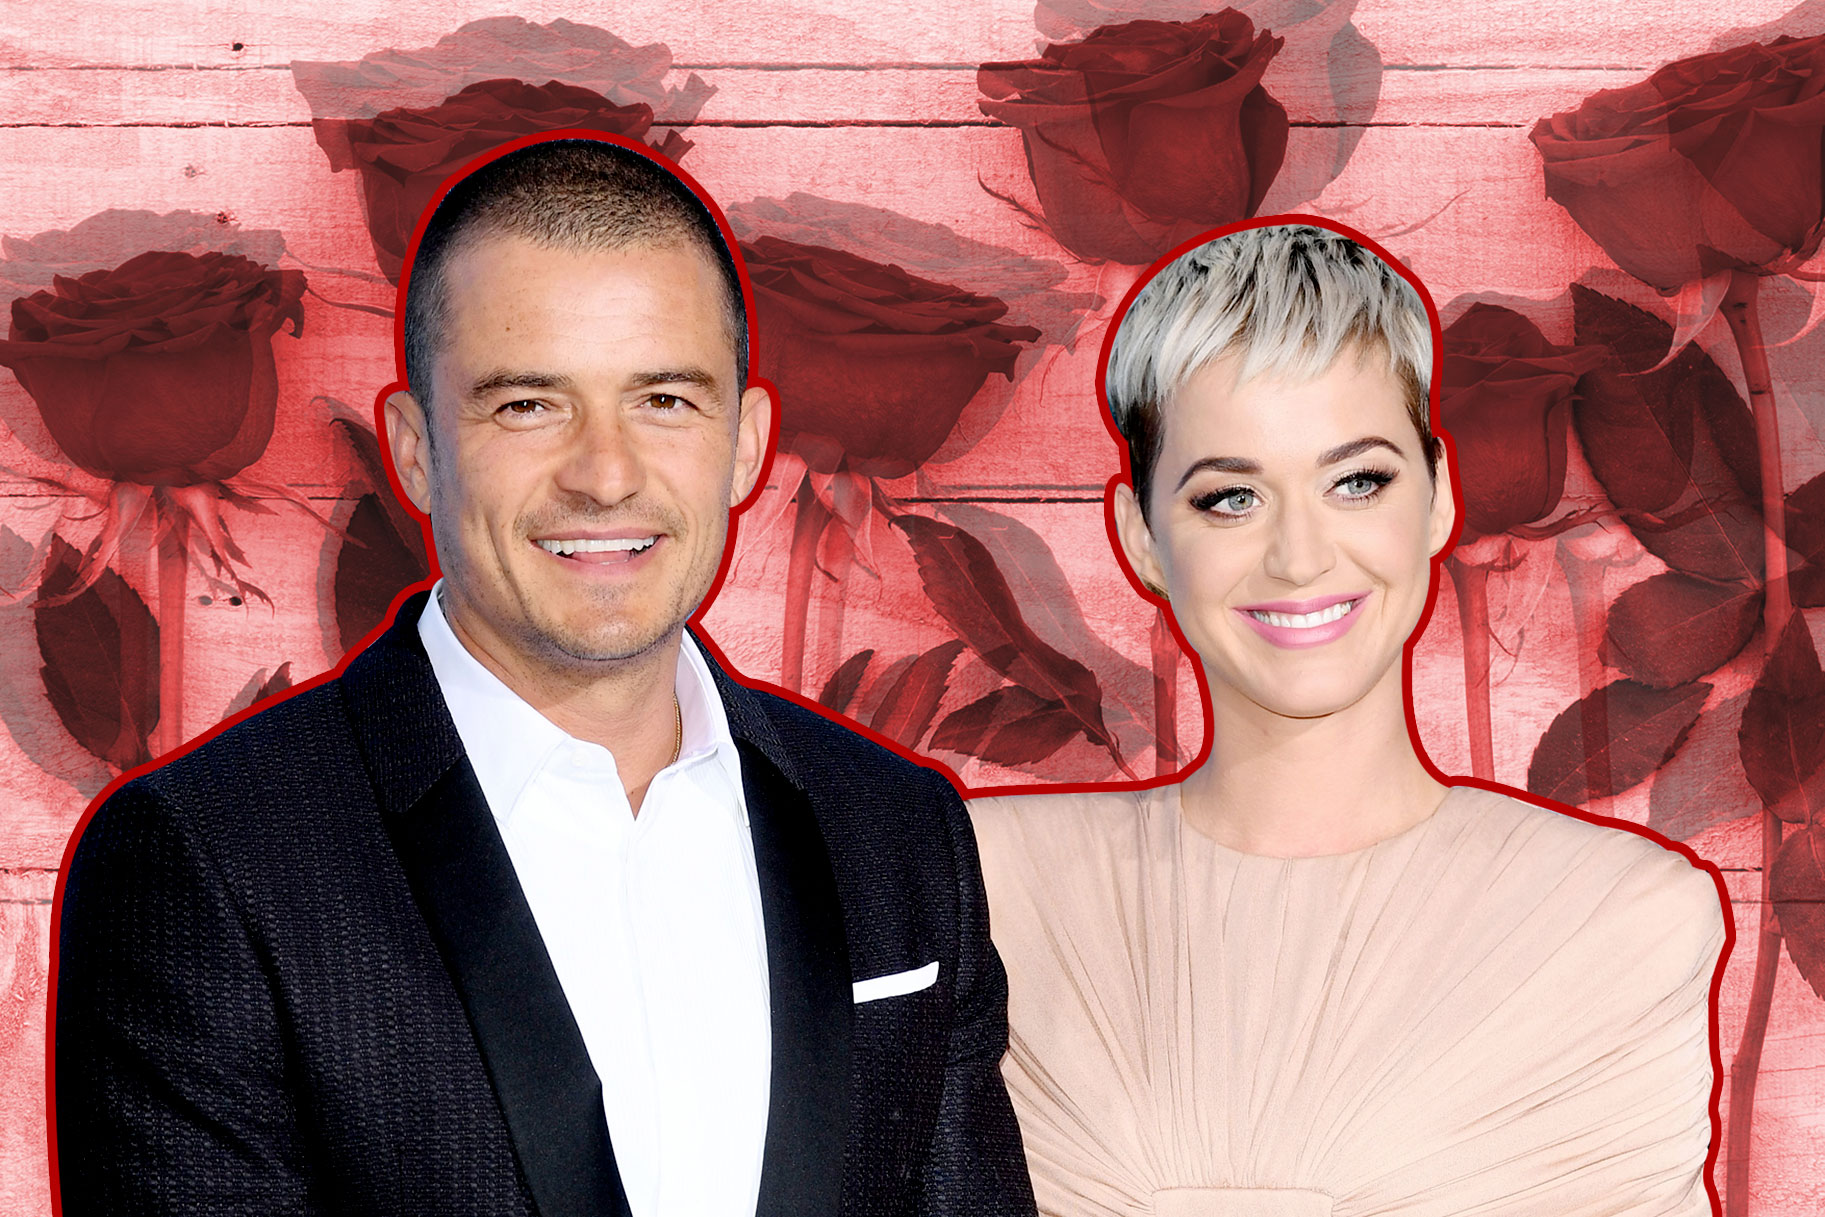 Orlando Bloom and Katy Perry Are Engaged